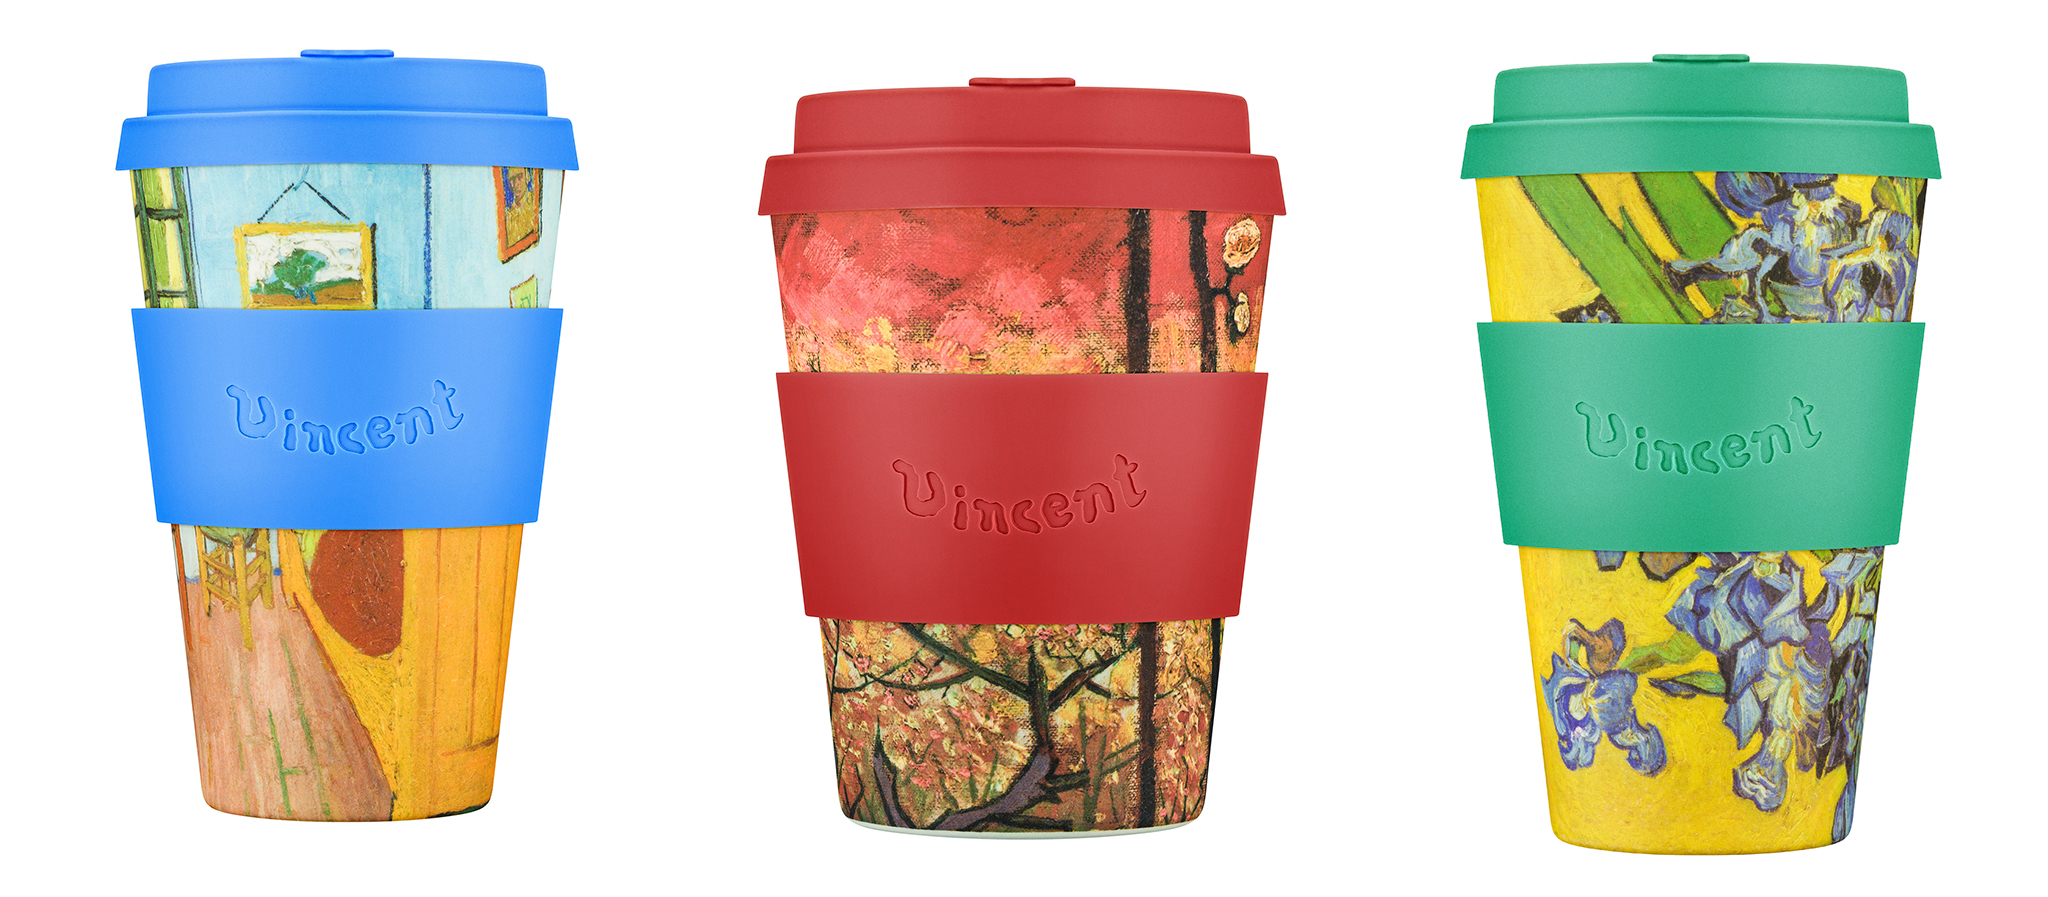 https://www.fashiontrendsetter.com/v2/wp-content/uploads/2021/06/Ecoffee-Cup-Van-Gogh-Coffee-Cups-Feat.jpg